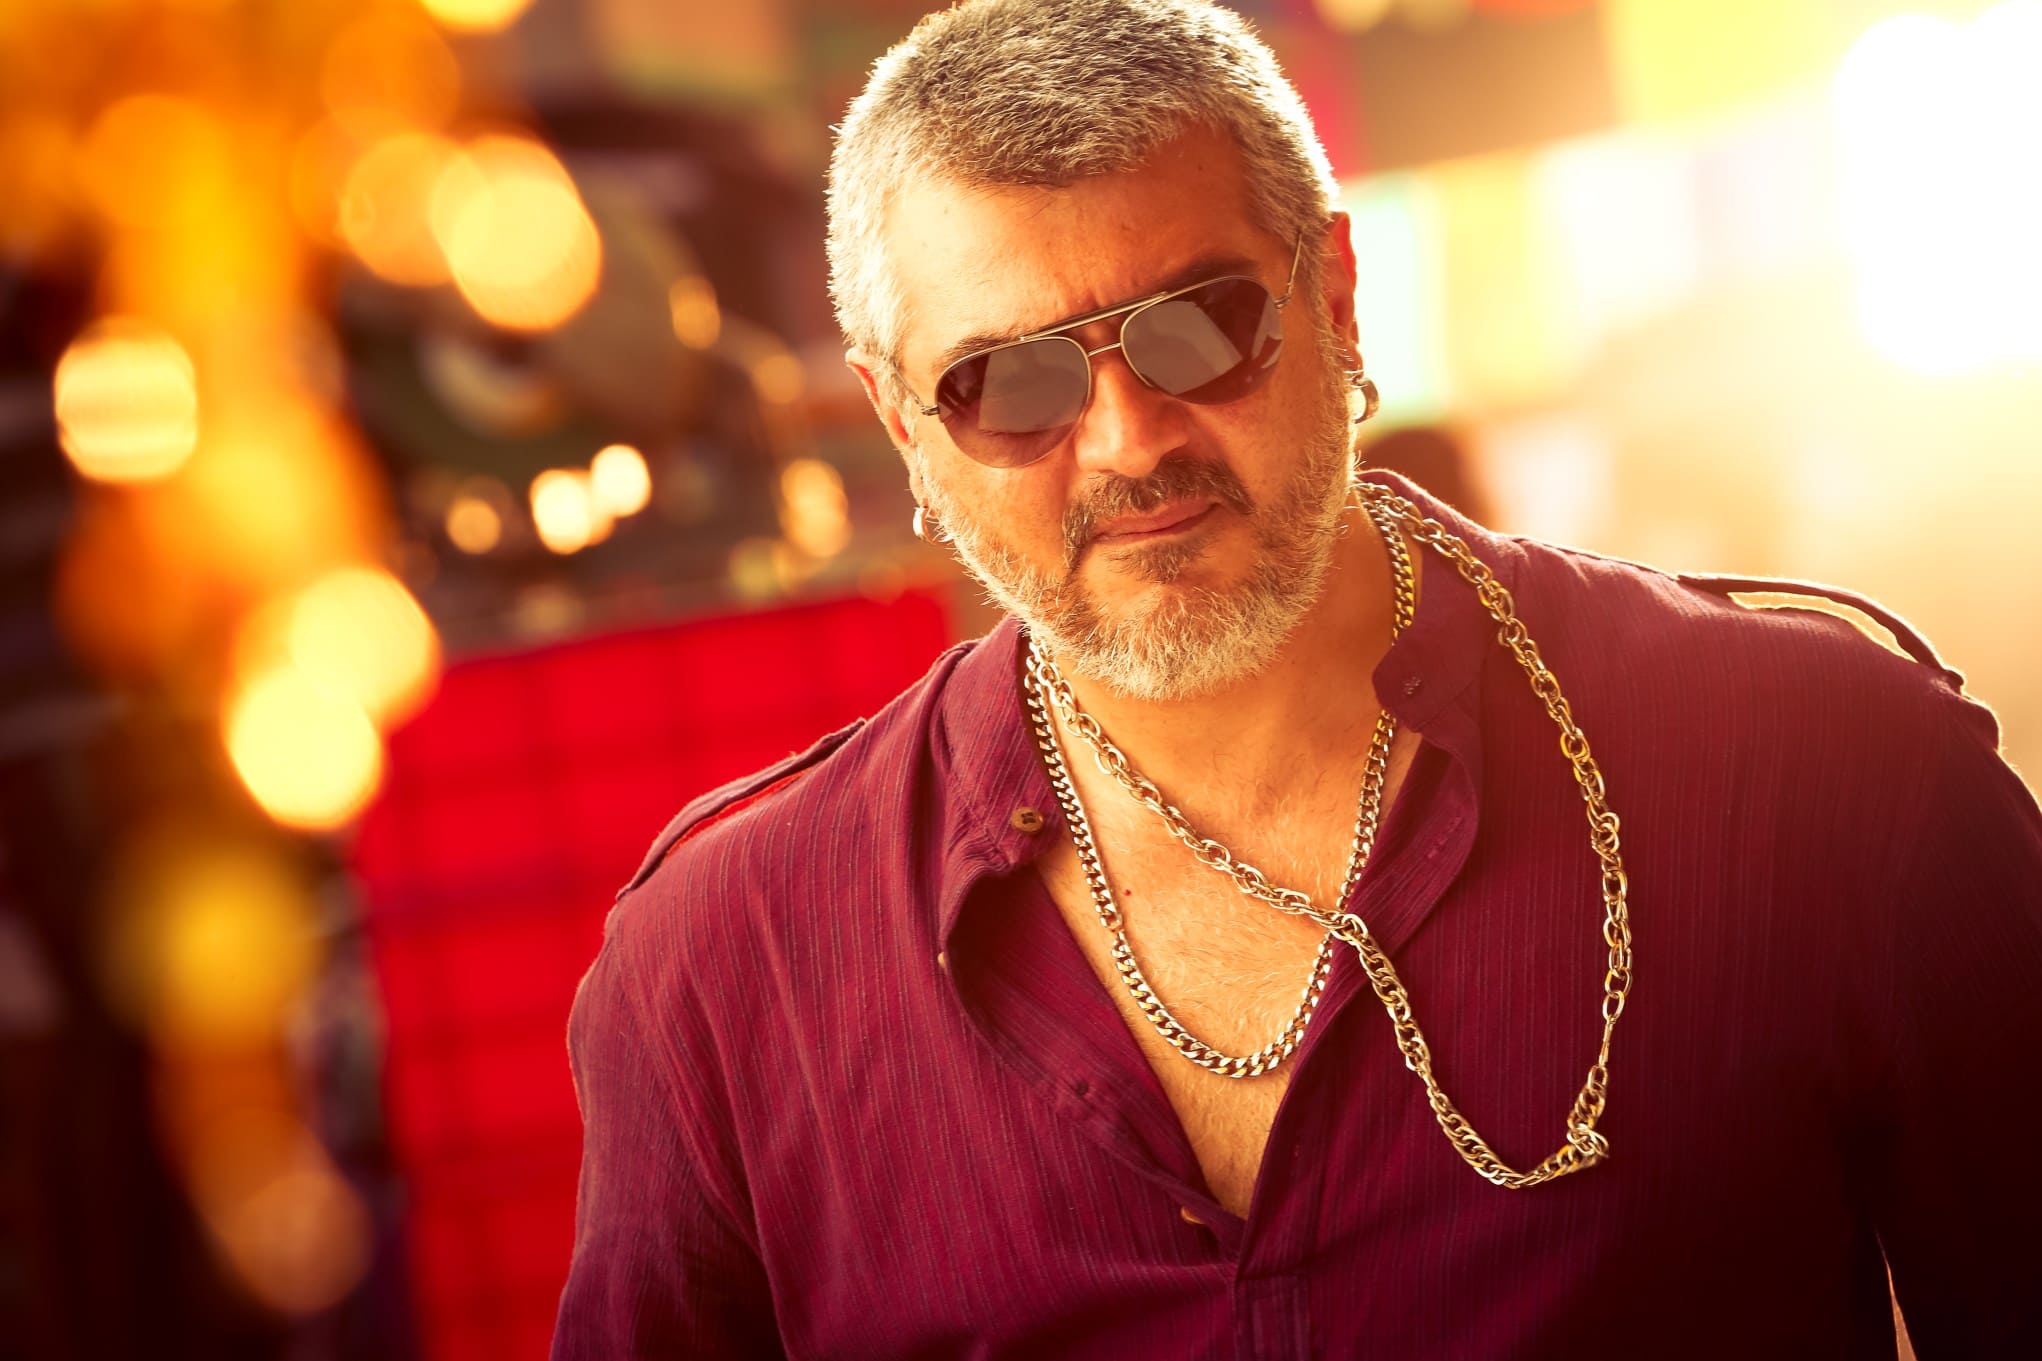 Original vs Remake: Do you think Chiranjeevi's Bholaa Shankar can do justice to Ajith's blockbuster Vedalam?